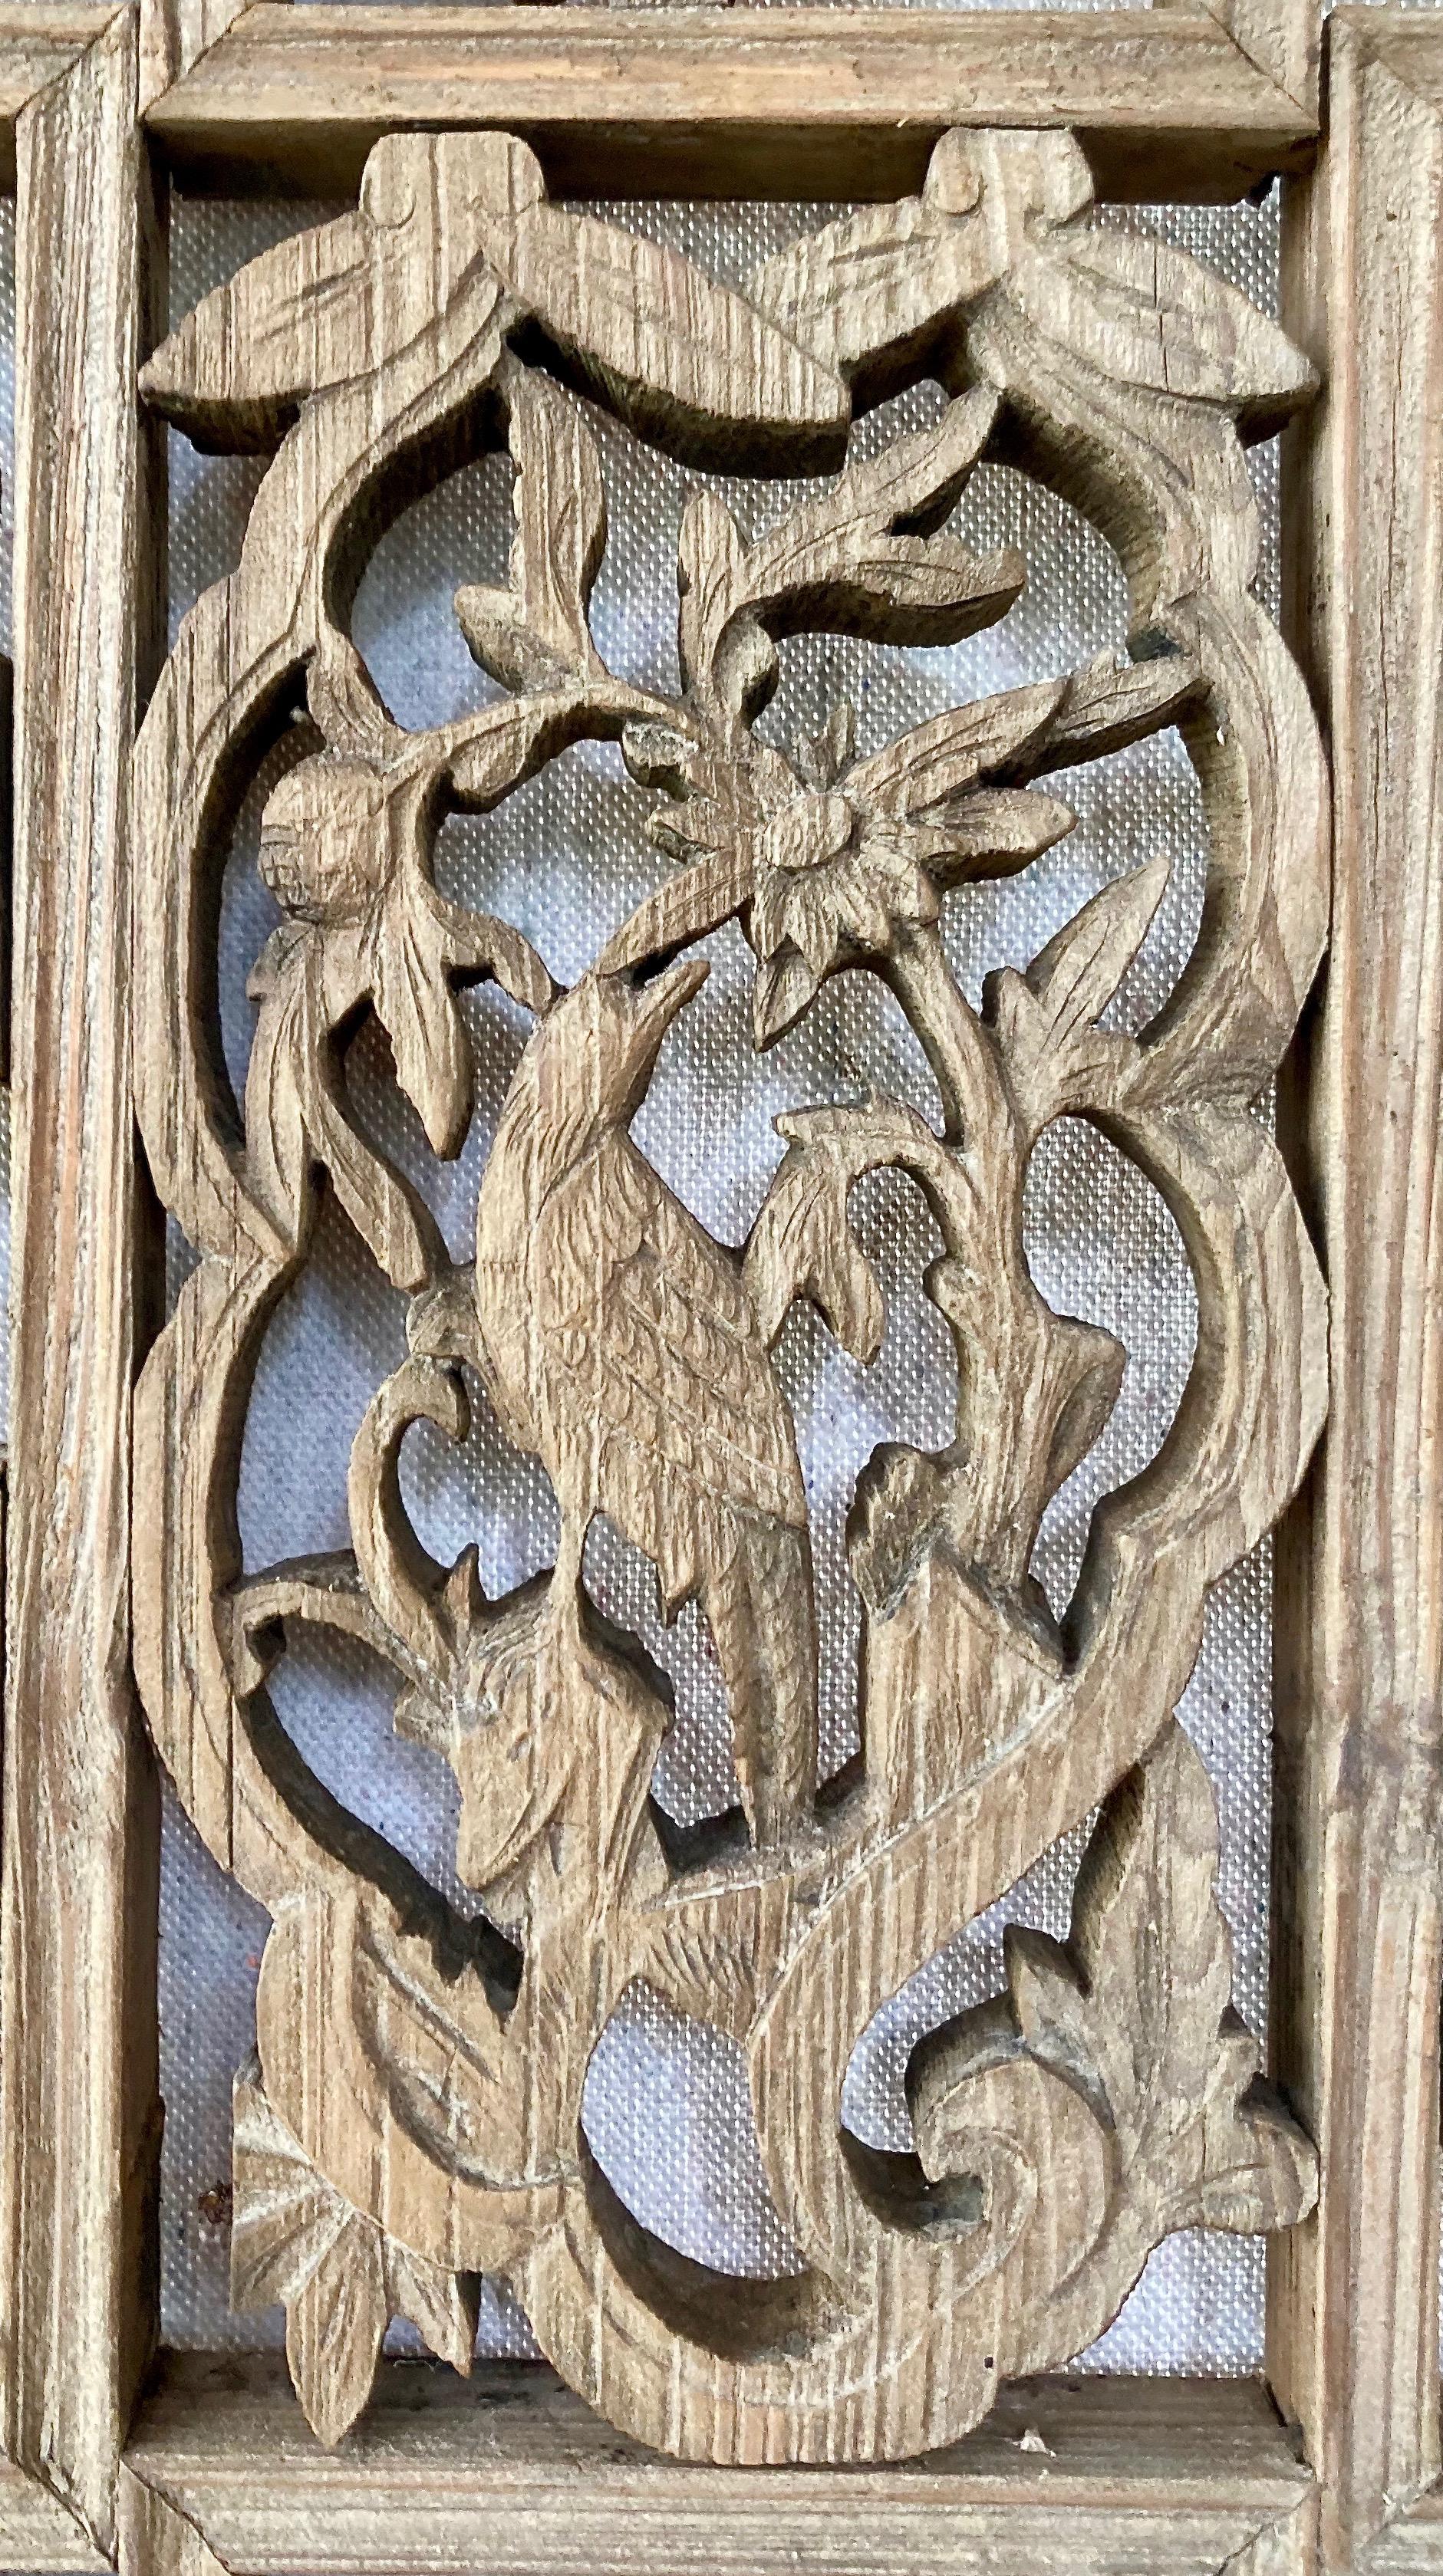 Framed three-pane panel includes openwork carving, relief carving + lattice work techniques, with a plant/floral motif.